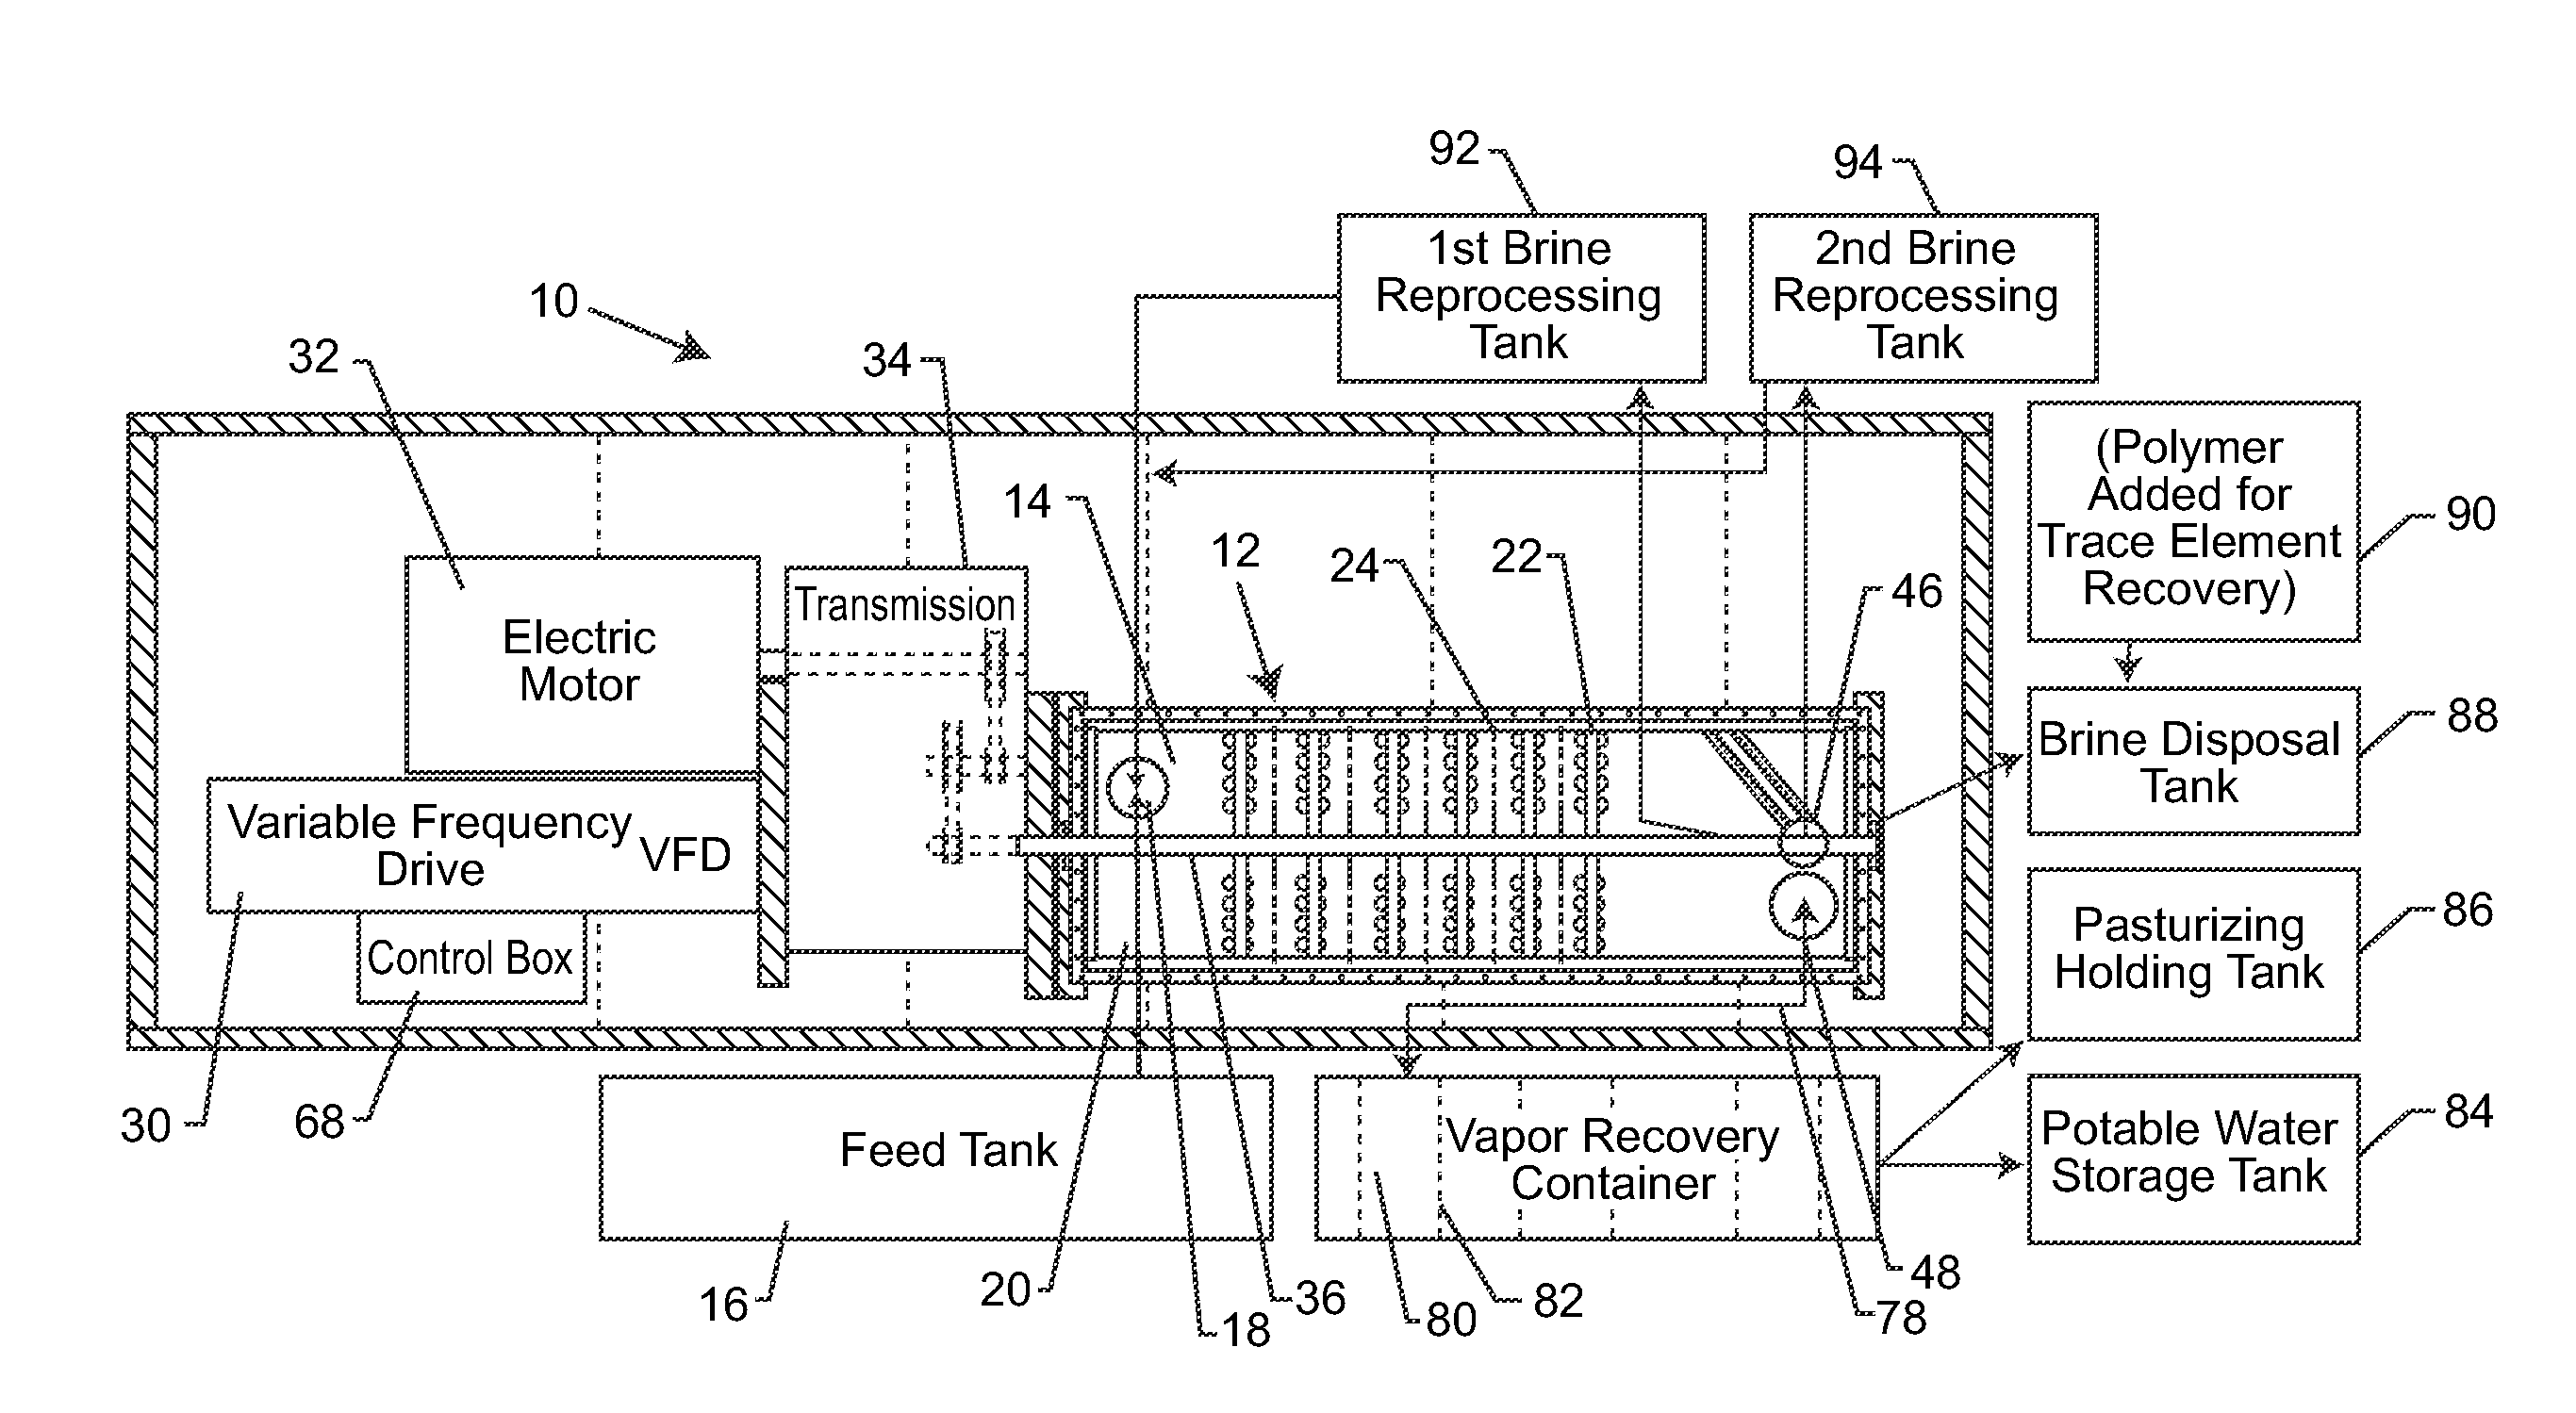 System for processing water and generating water vapor for other processing uses